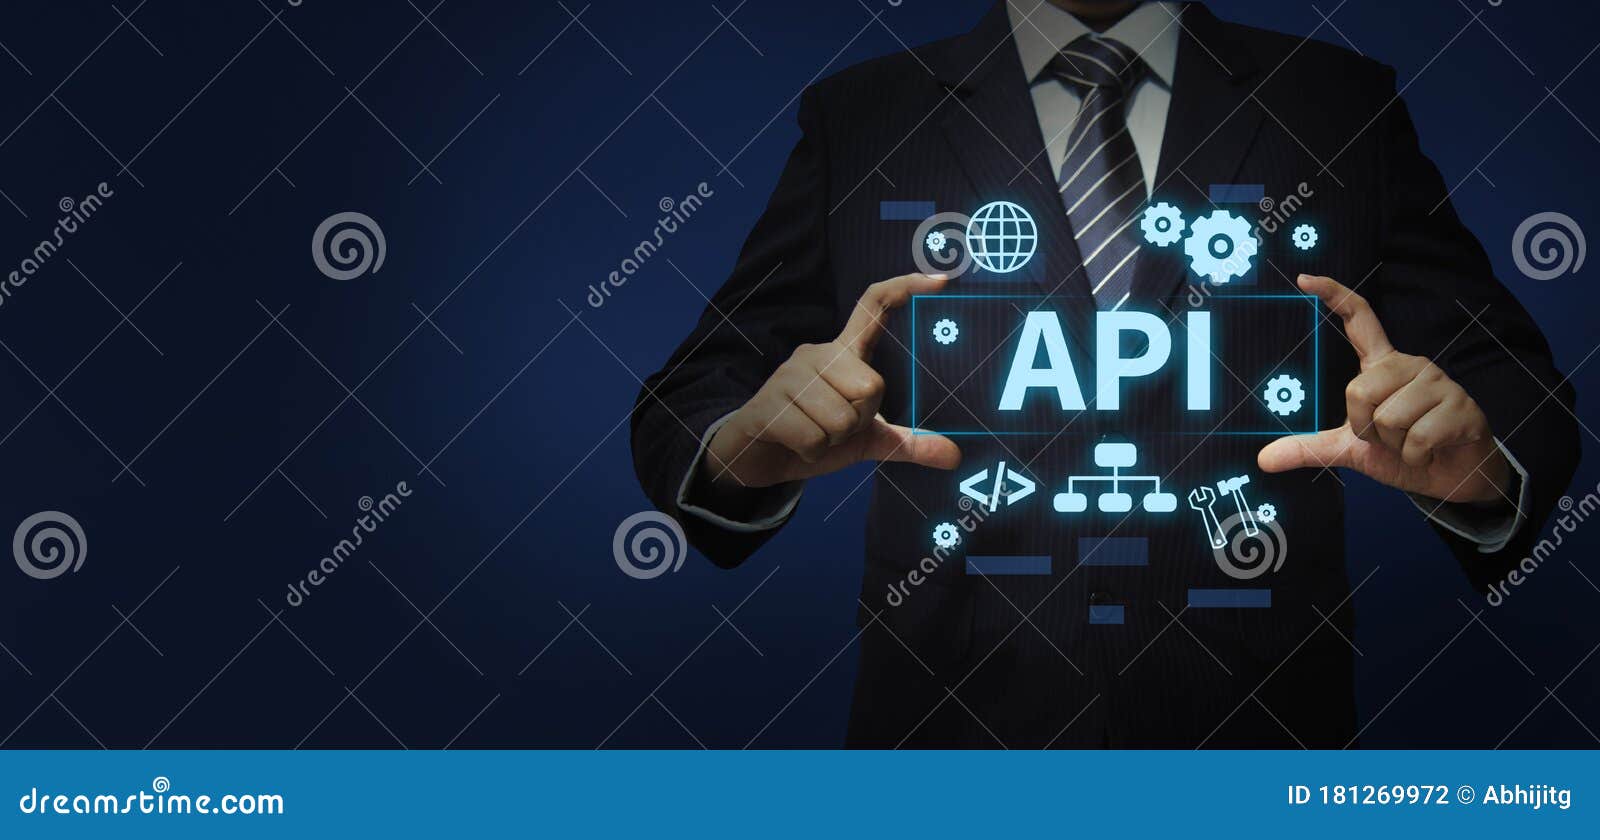 api application programming interface digital concept with business person